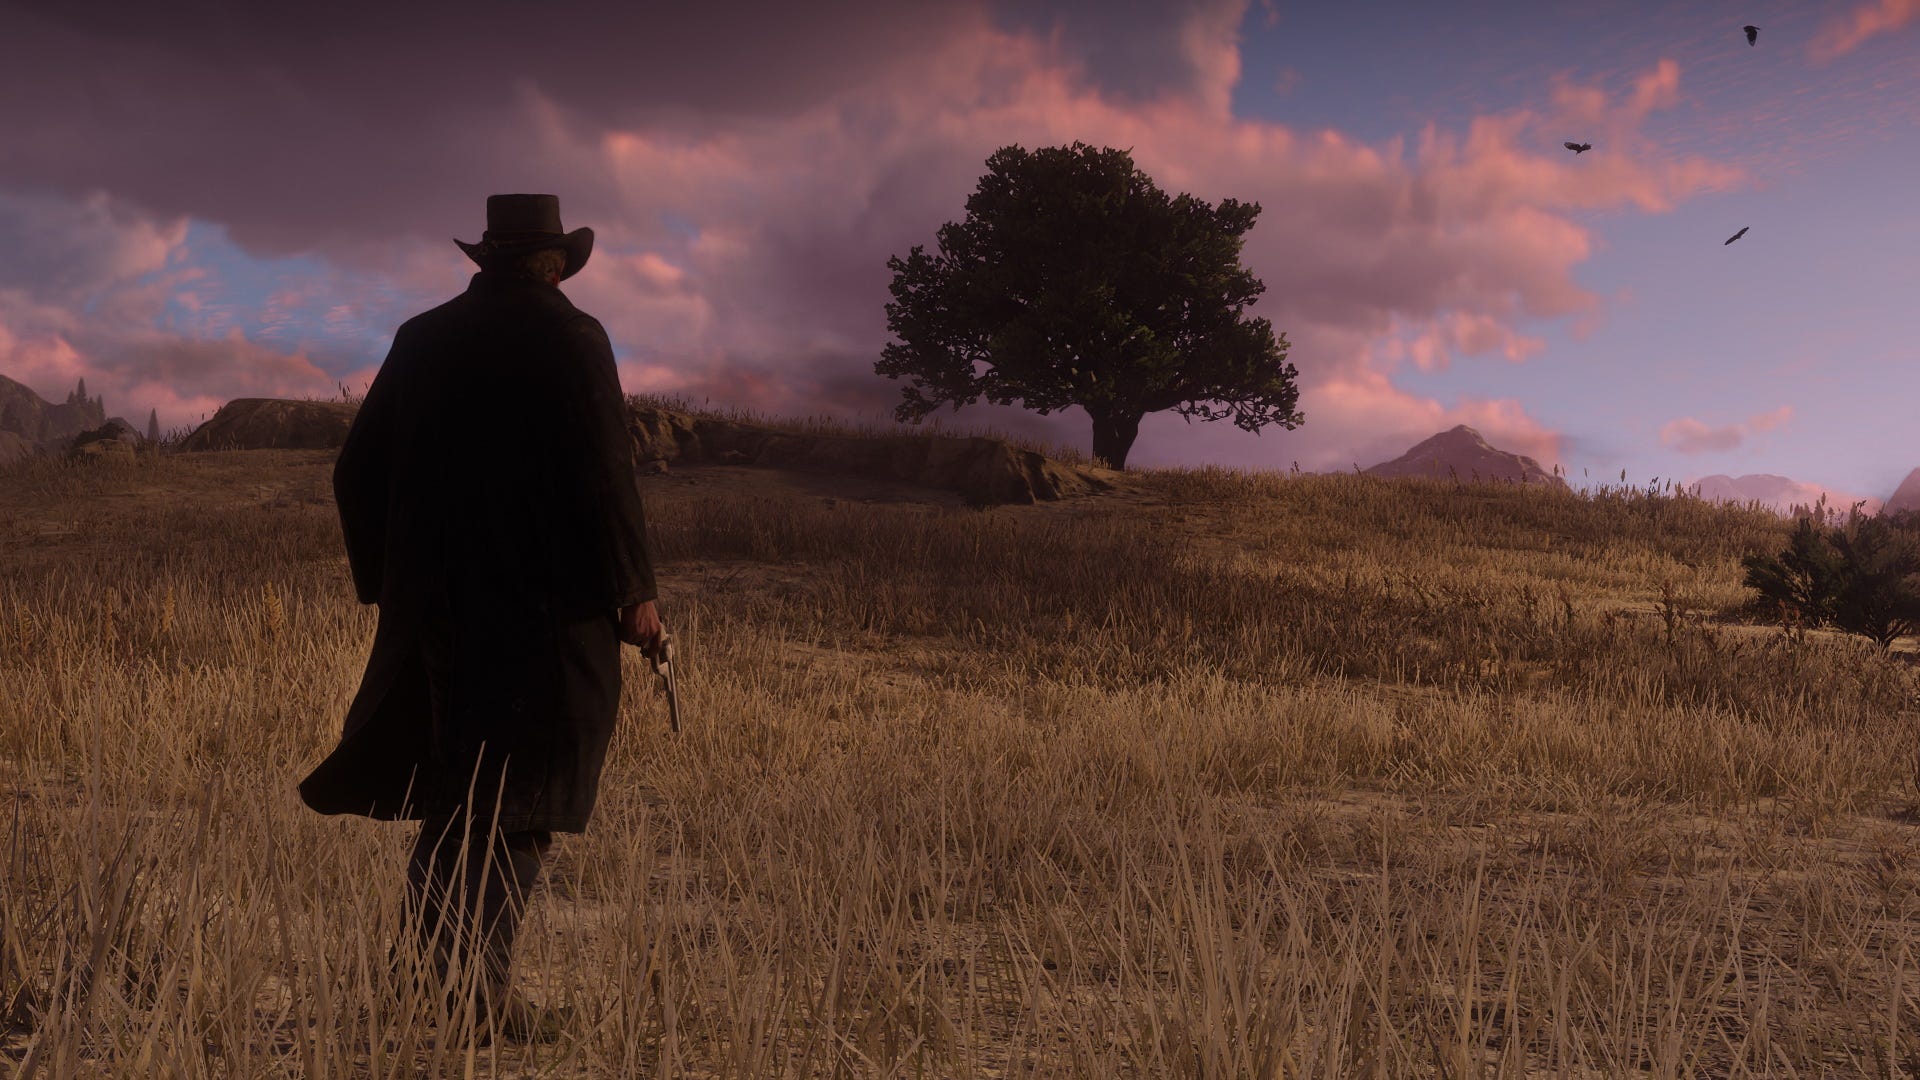 Red Dead Redemption 2 to get next-gen upgrade per leaked Microsoft documents